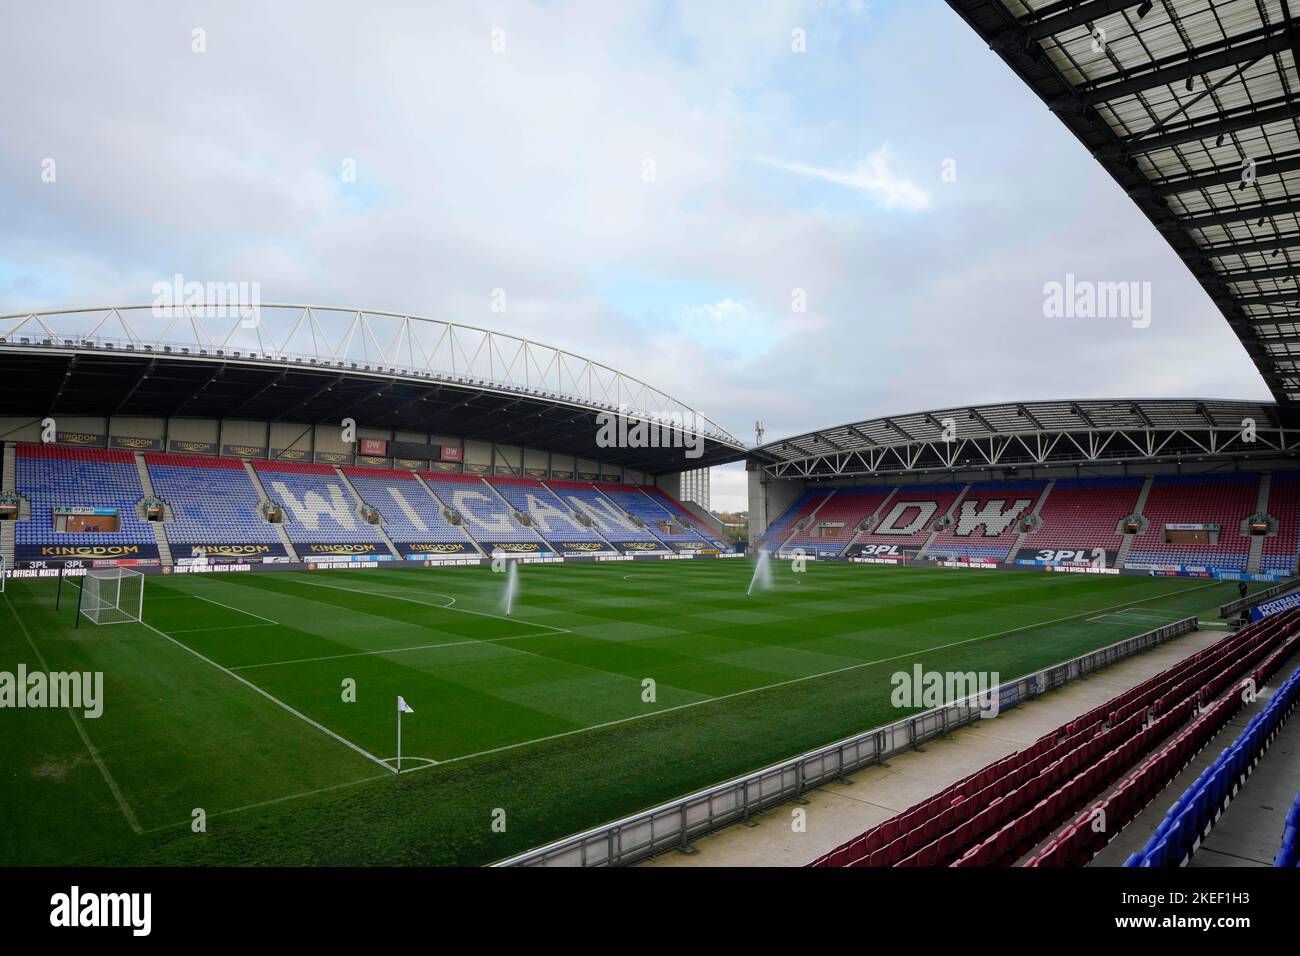 General view of DW Stadium before the Sky Bet Championship match Wigan Athletic vs Blackpool at DW Stadium, Wigan, United Kingdom, 12th November 2022  (Photo by Steve Flynn/News Images) Stock Photo